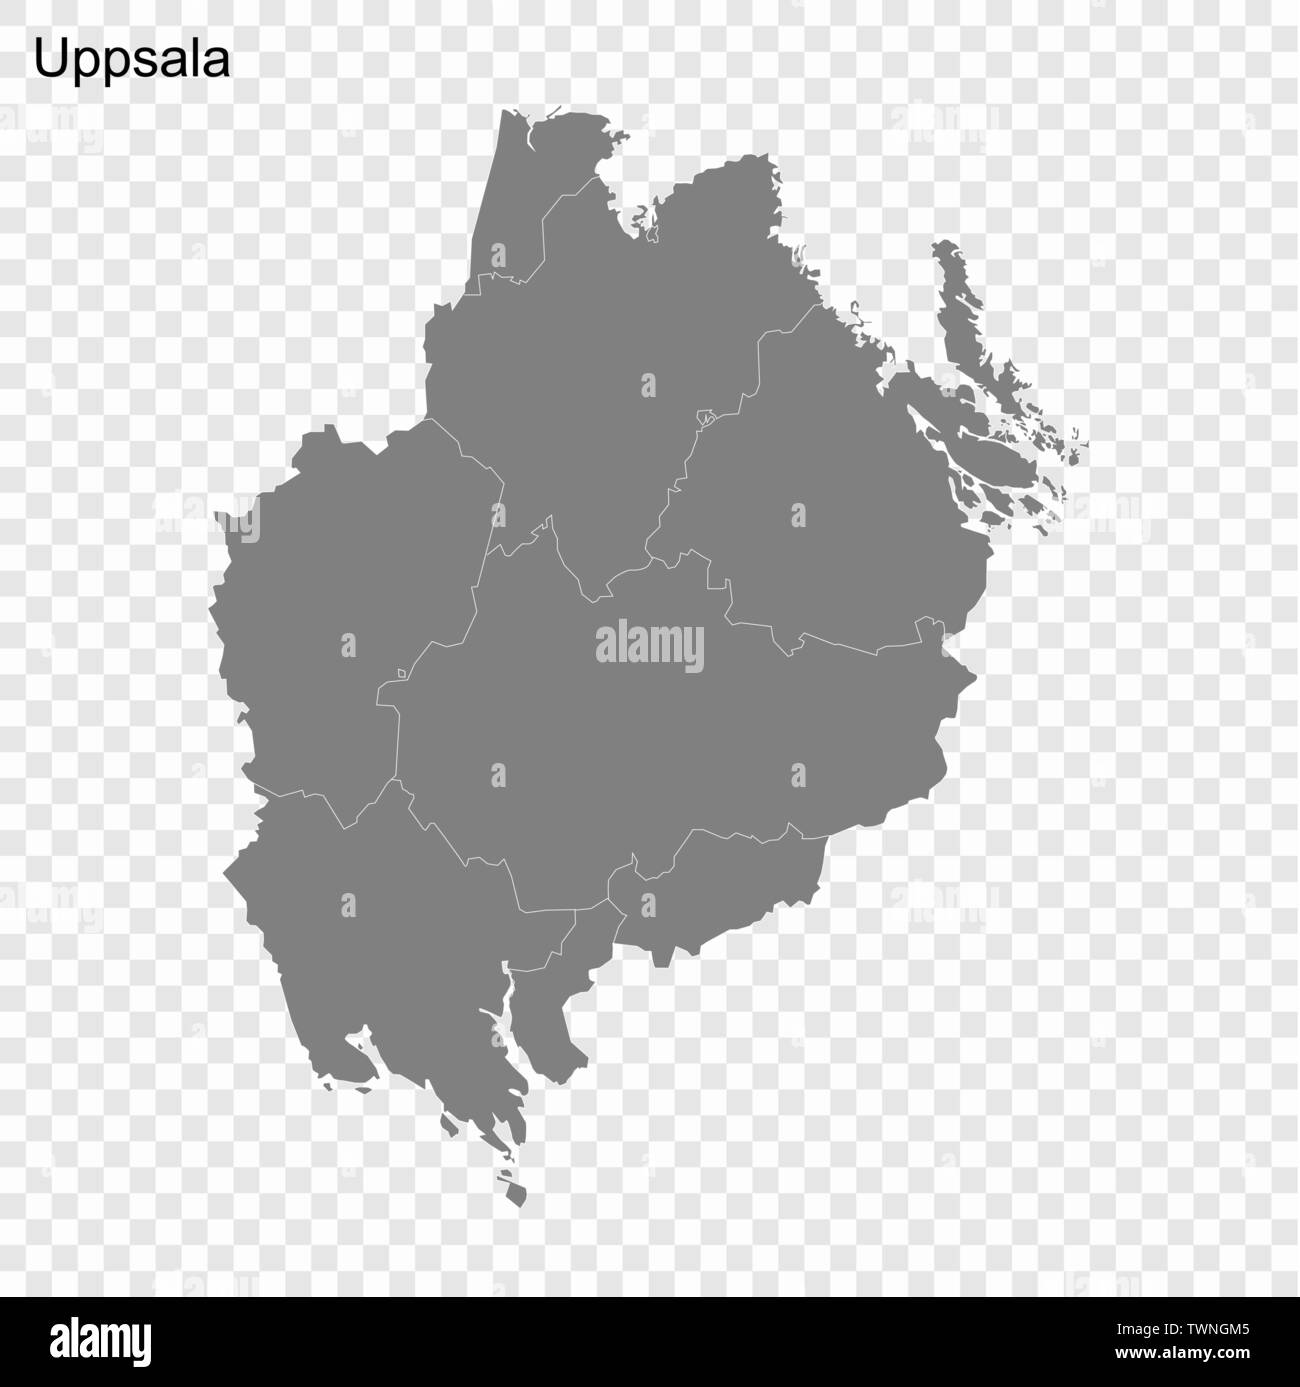 High Quality map of Uppsala is a county of Sweden, with borders of the ...